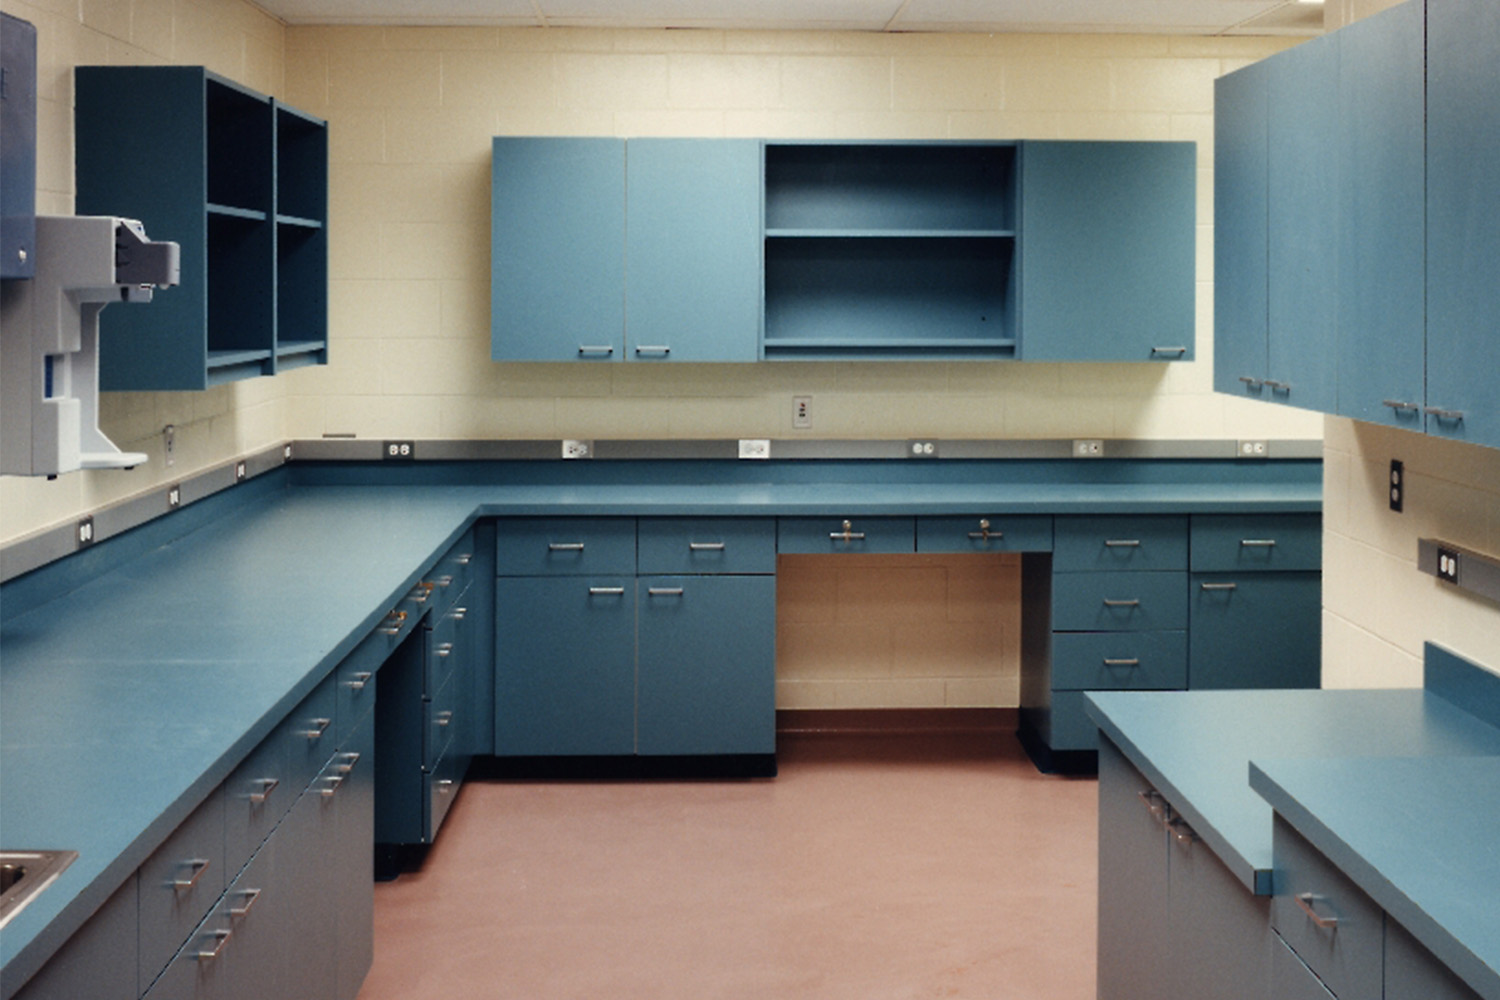 Clean medical exam room with blue counters and cabinets